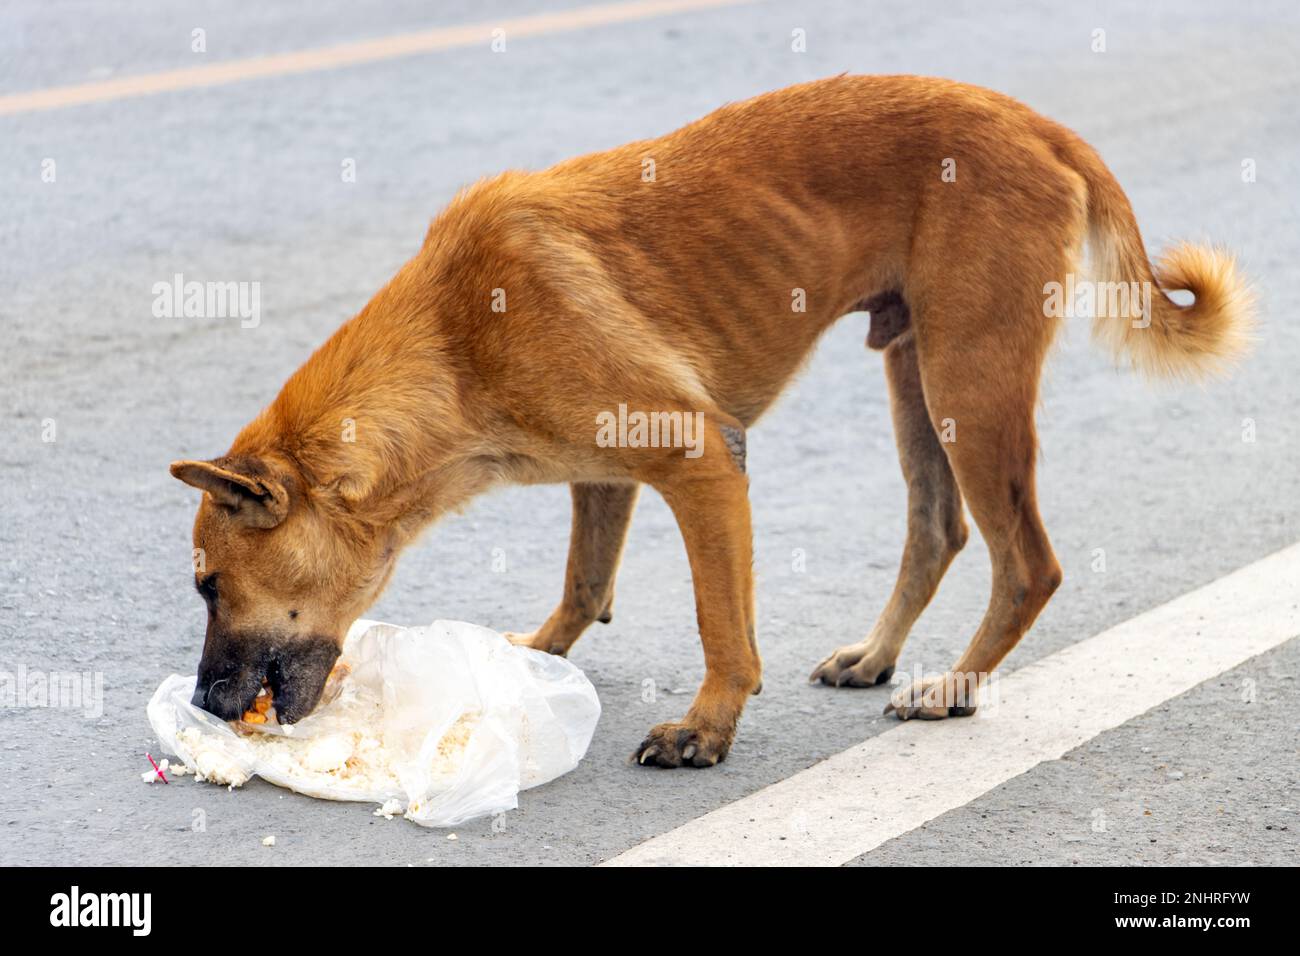 A hungry dog eats boiled rice in a plastic bag on the side of the road, Thailand Stock Photo